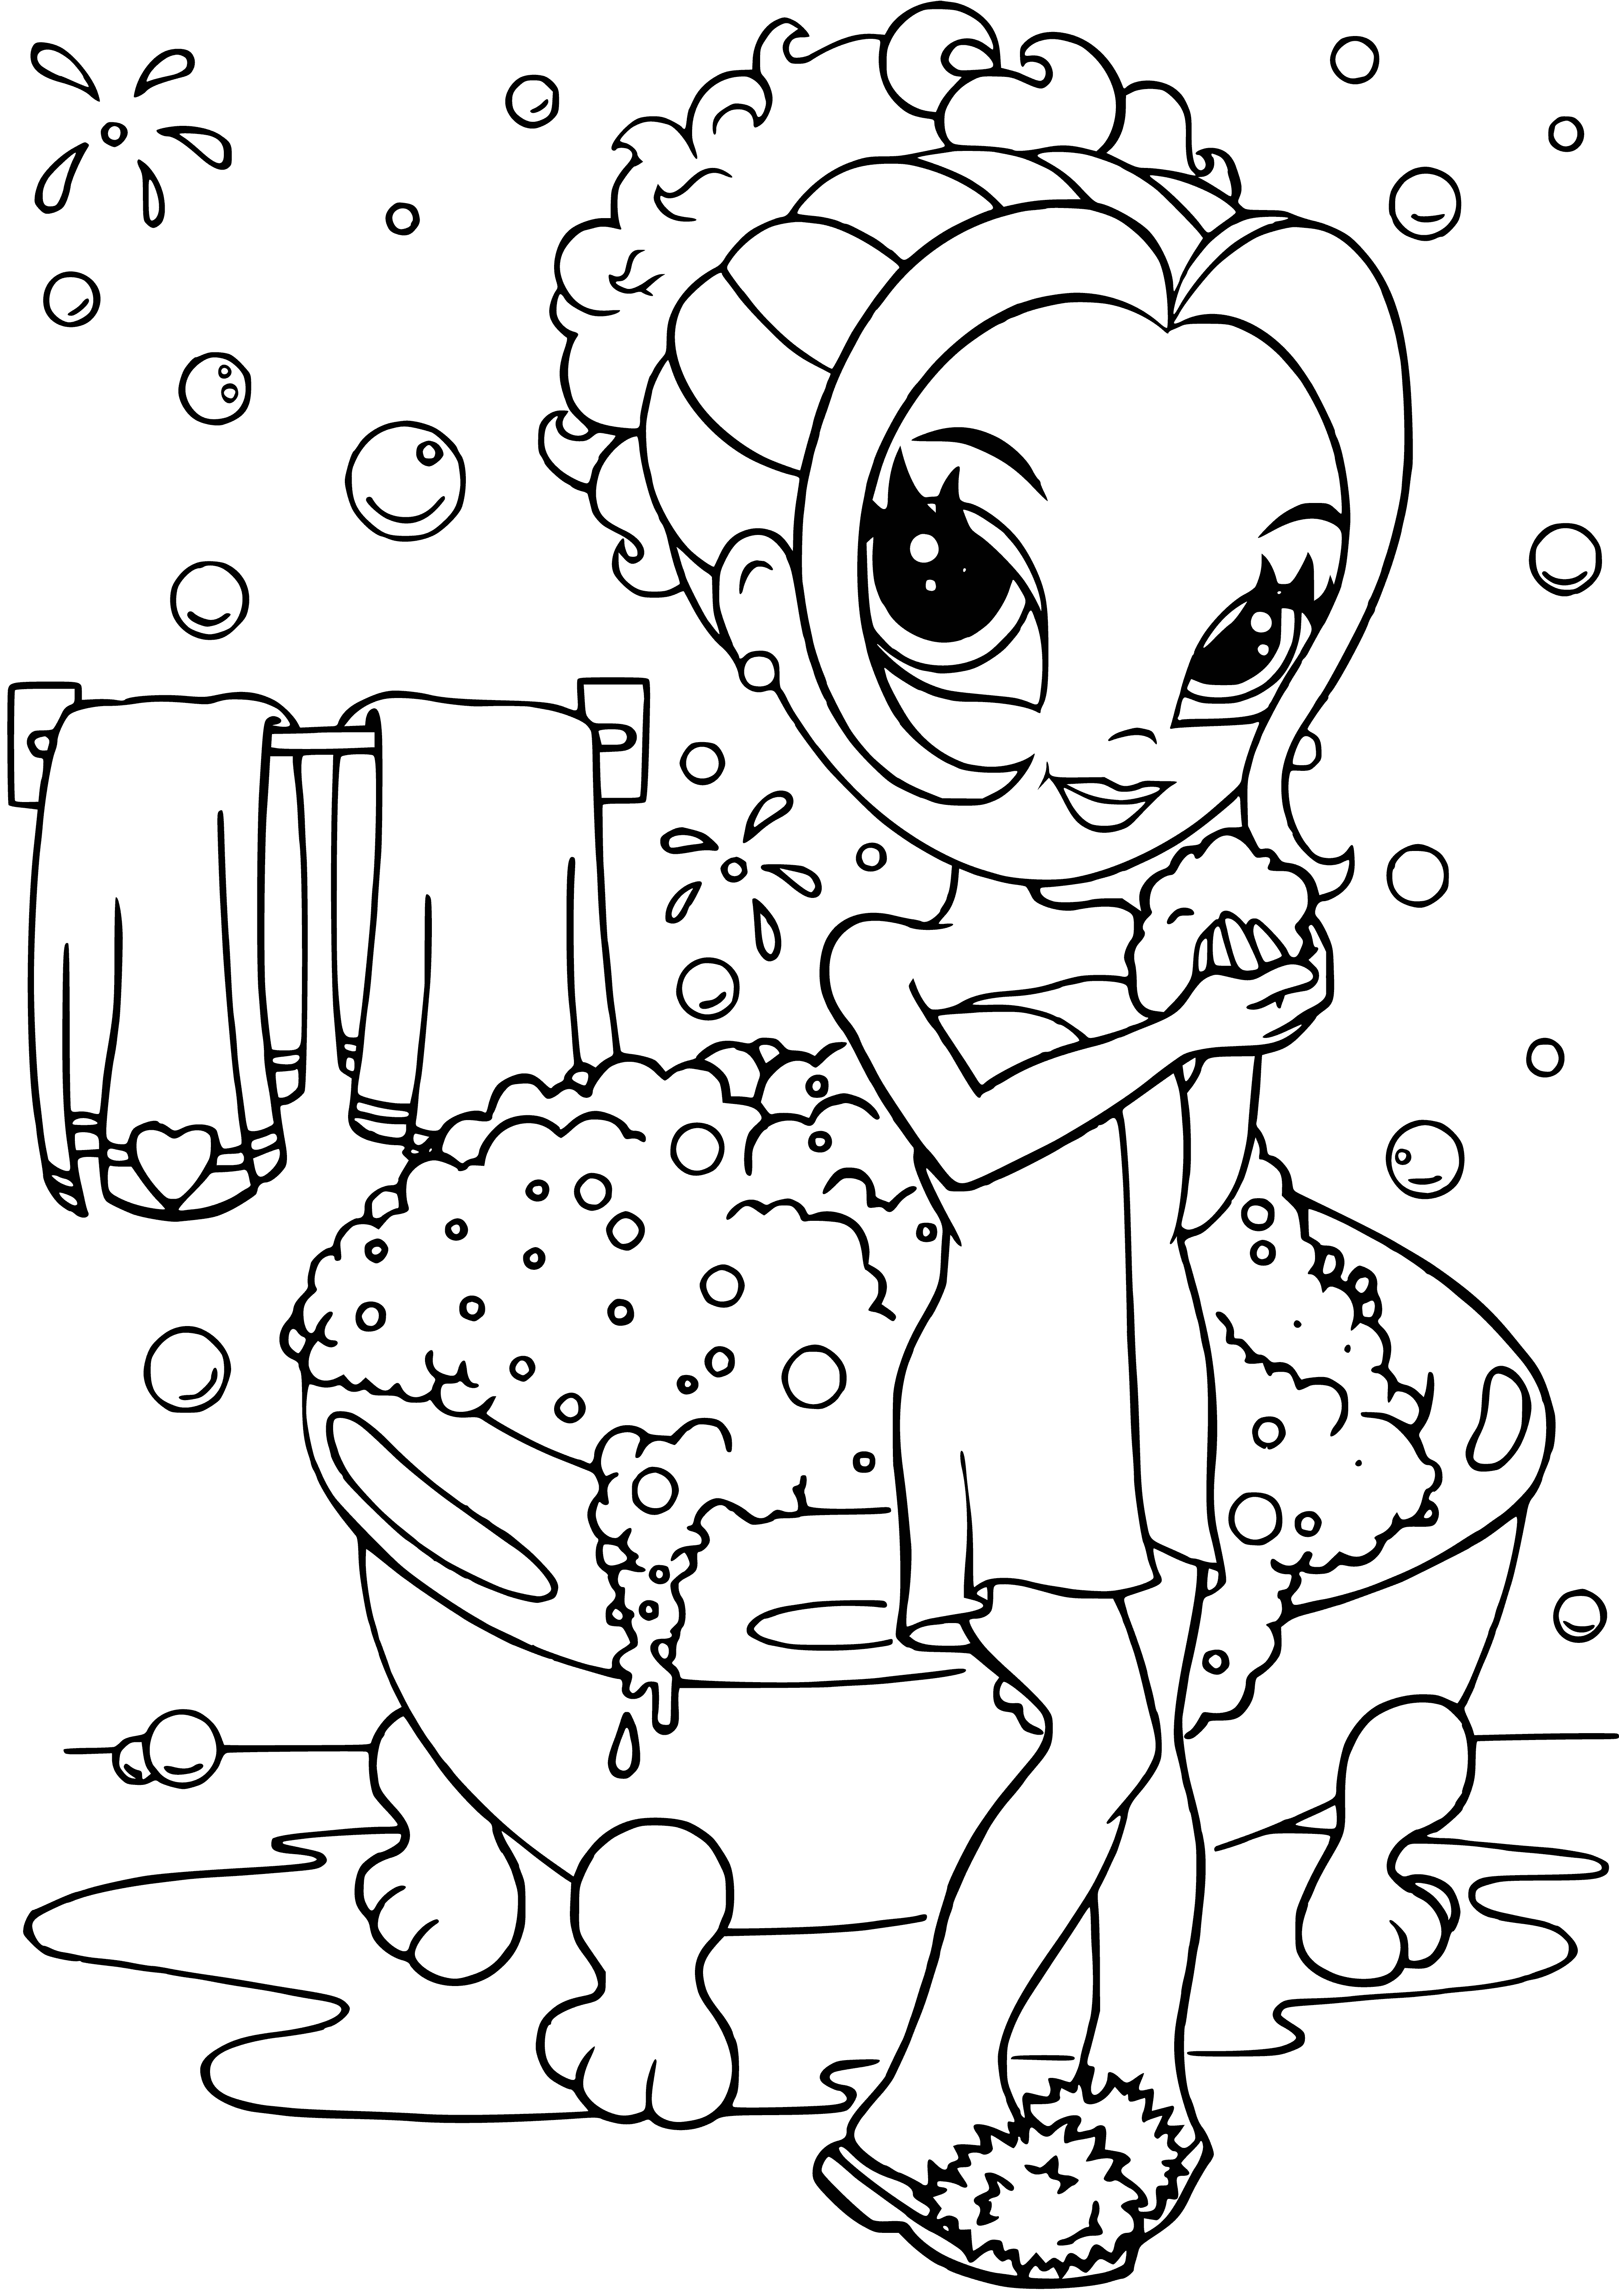 coloring page: Girl admires her reflection in mirror in pink dress, gold necklace & holding brush; smiling, happy with her appearance.